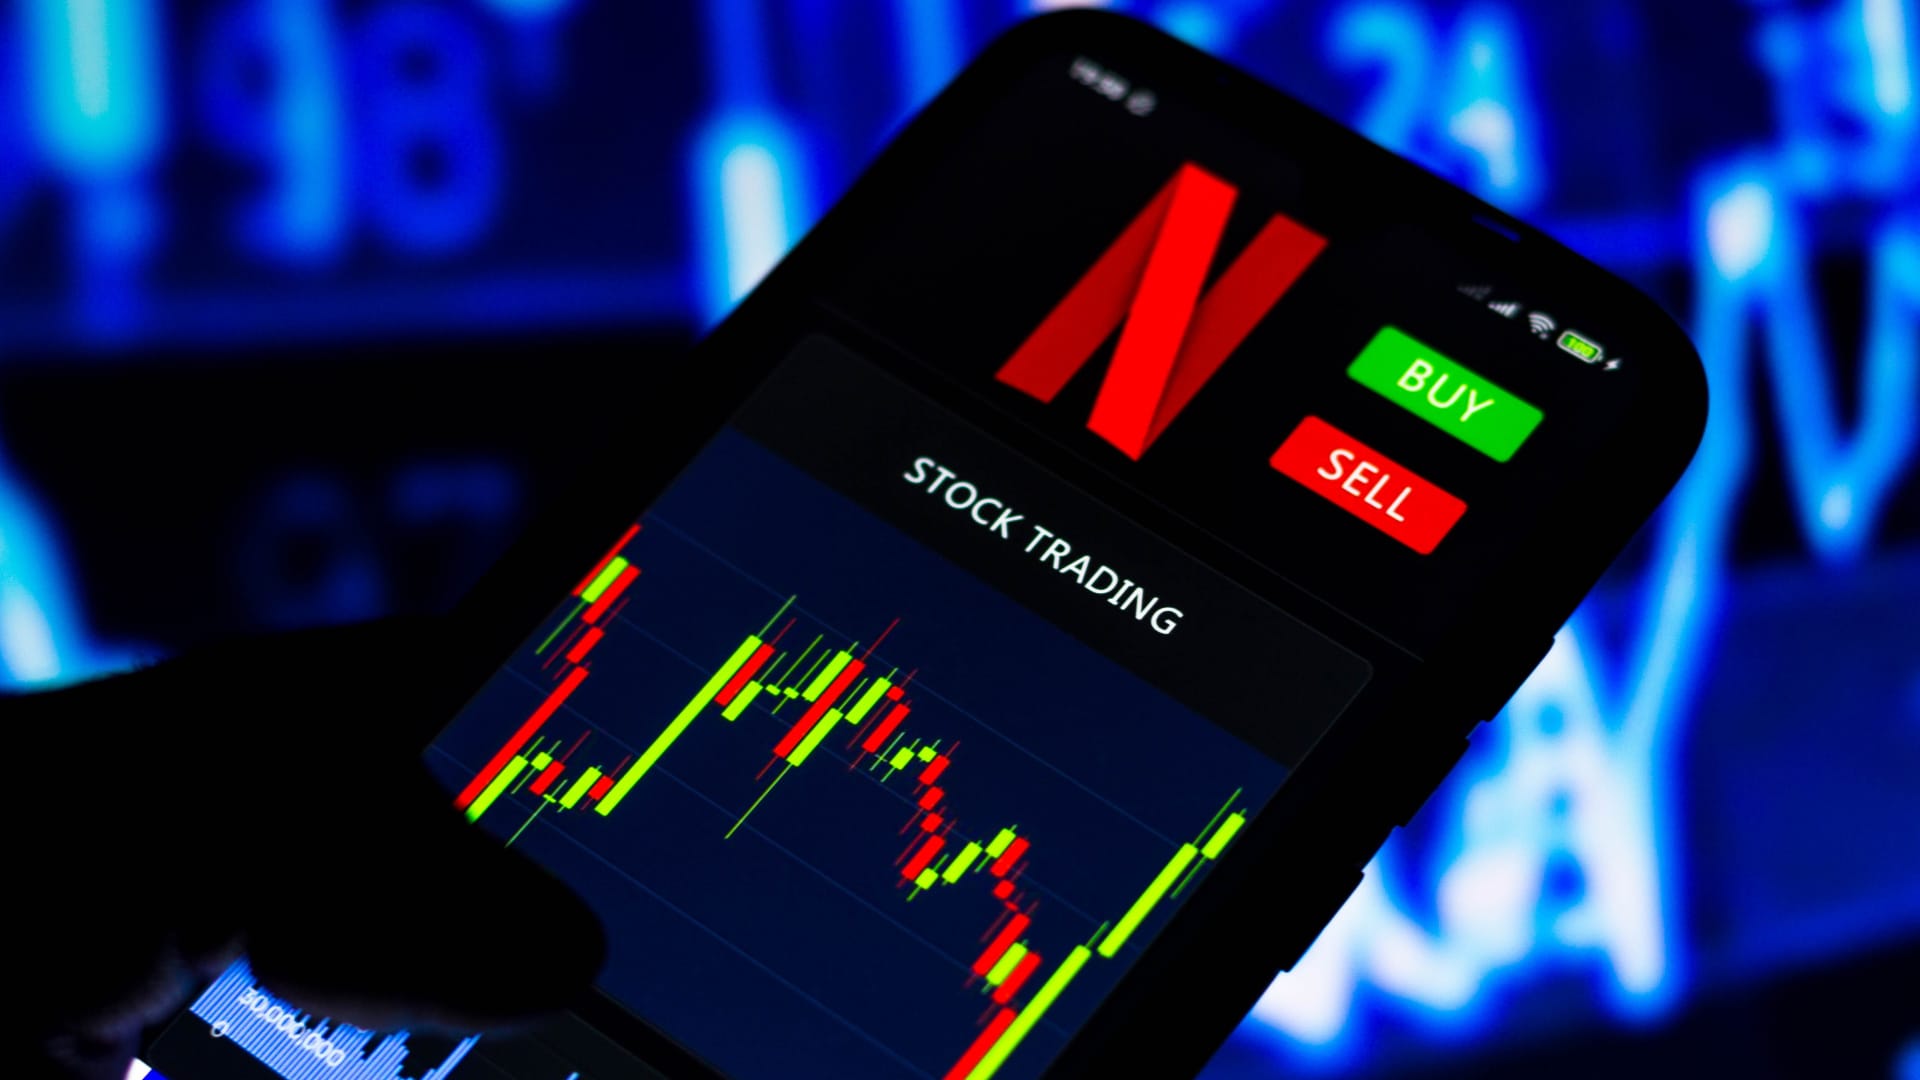 Netflix shares are 'top pick' for 2023 despite ad target miss, Evercore's Mark Mahaney says